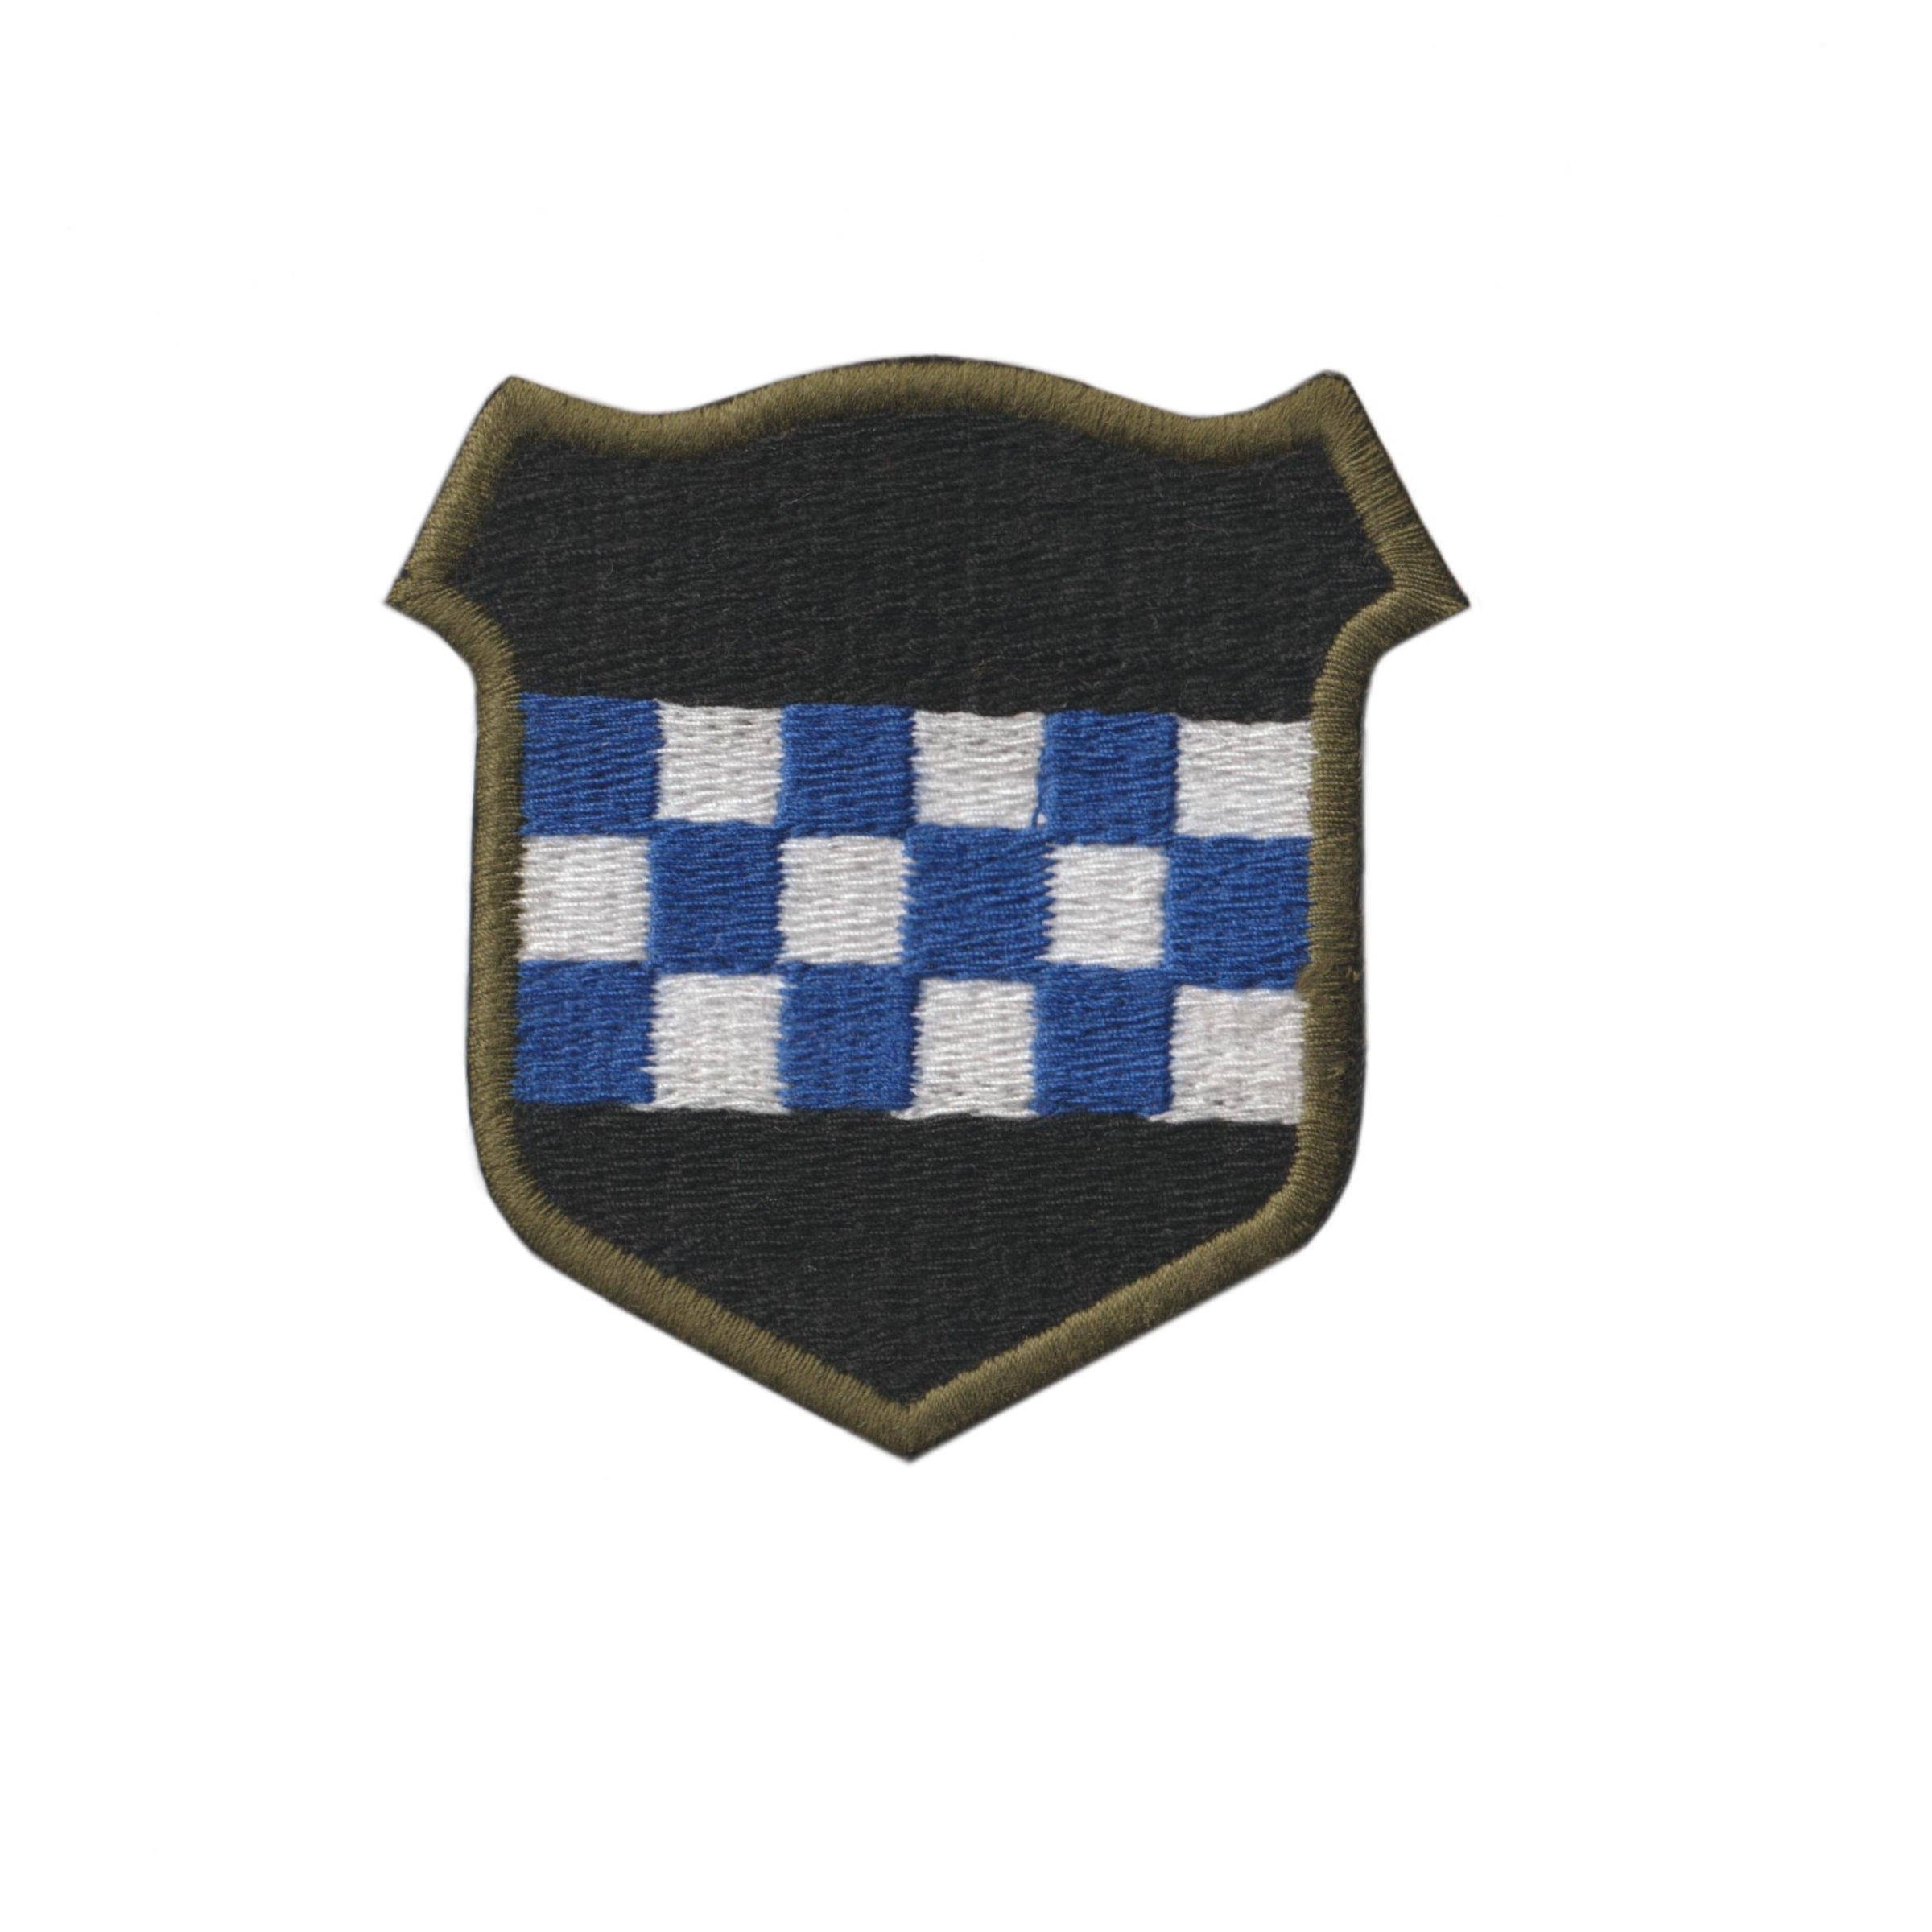 Patch of 99th Infantry Division - repro 4,75 € | Nestof.pl